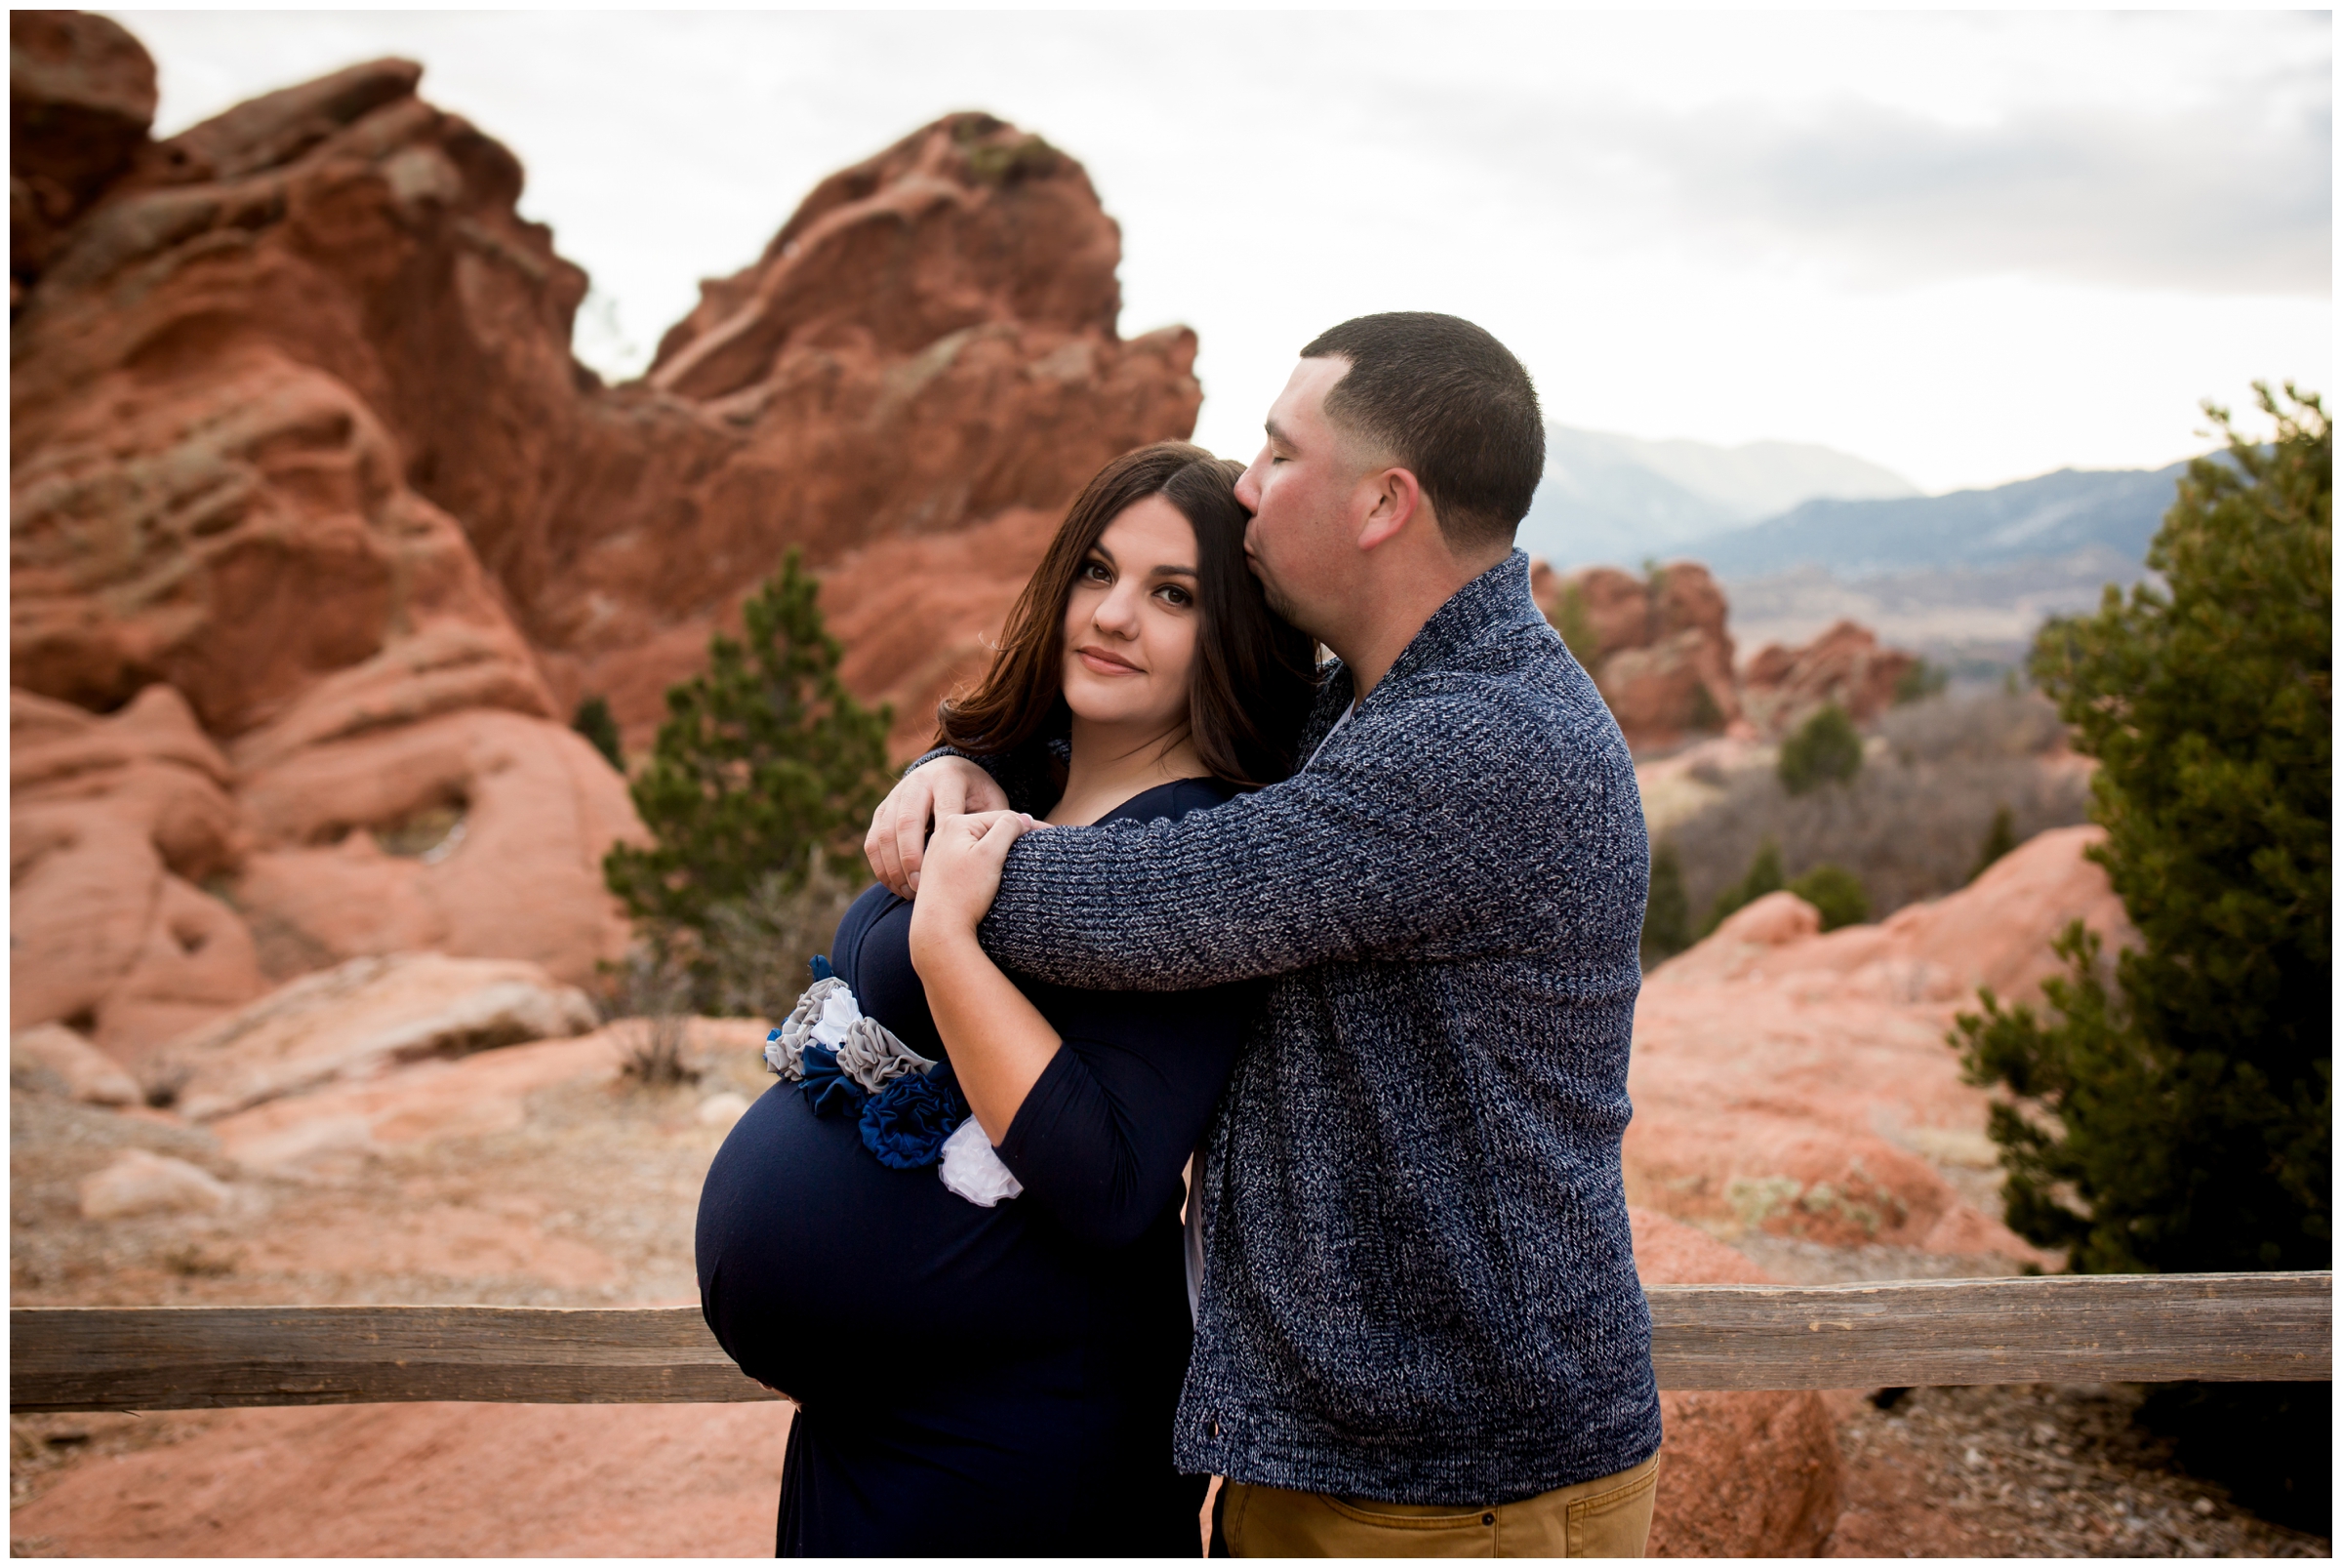 Colorado Springs maternity photography at Garden of the Gods park by award winning Longmont photographer Plum Pretty Photography